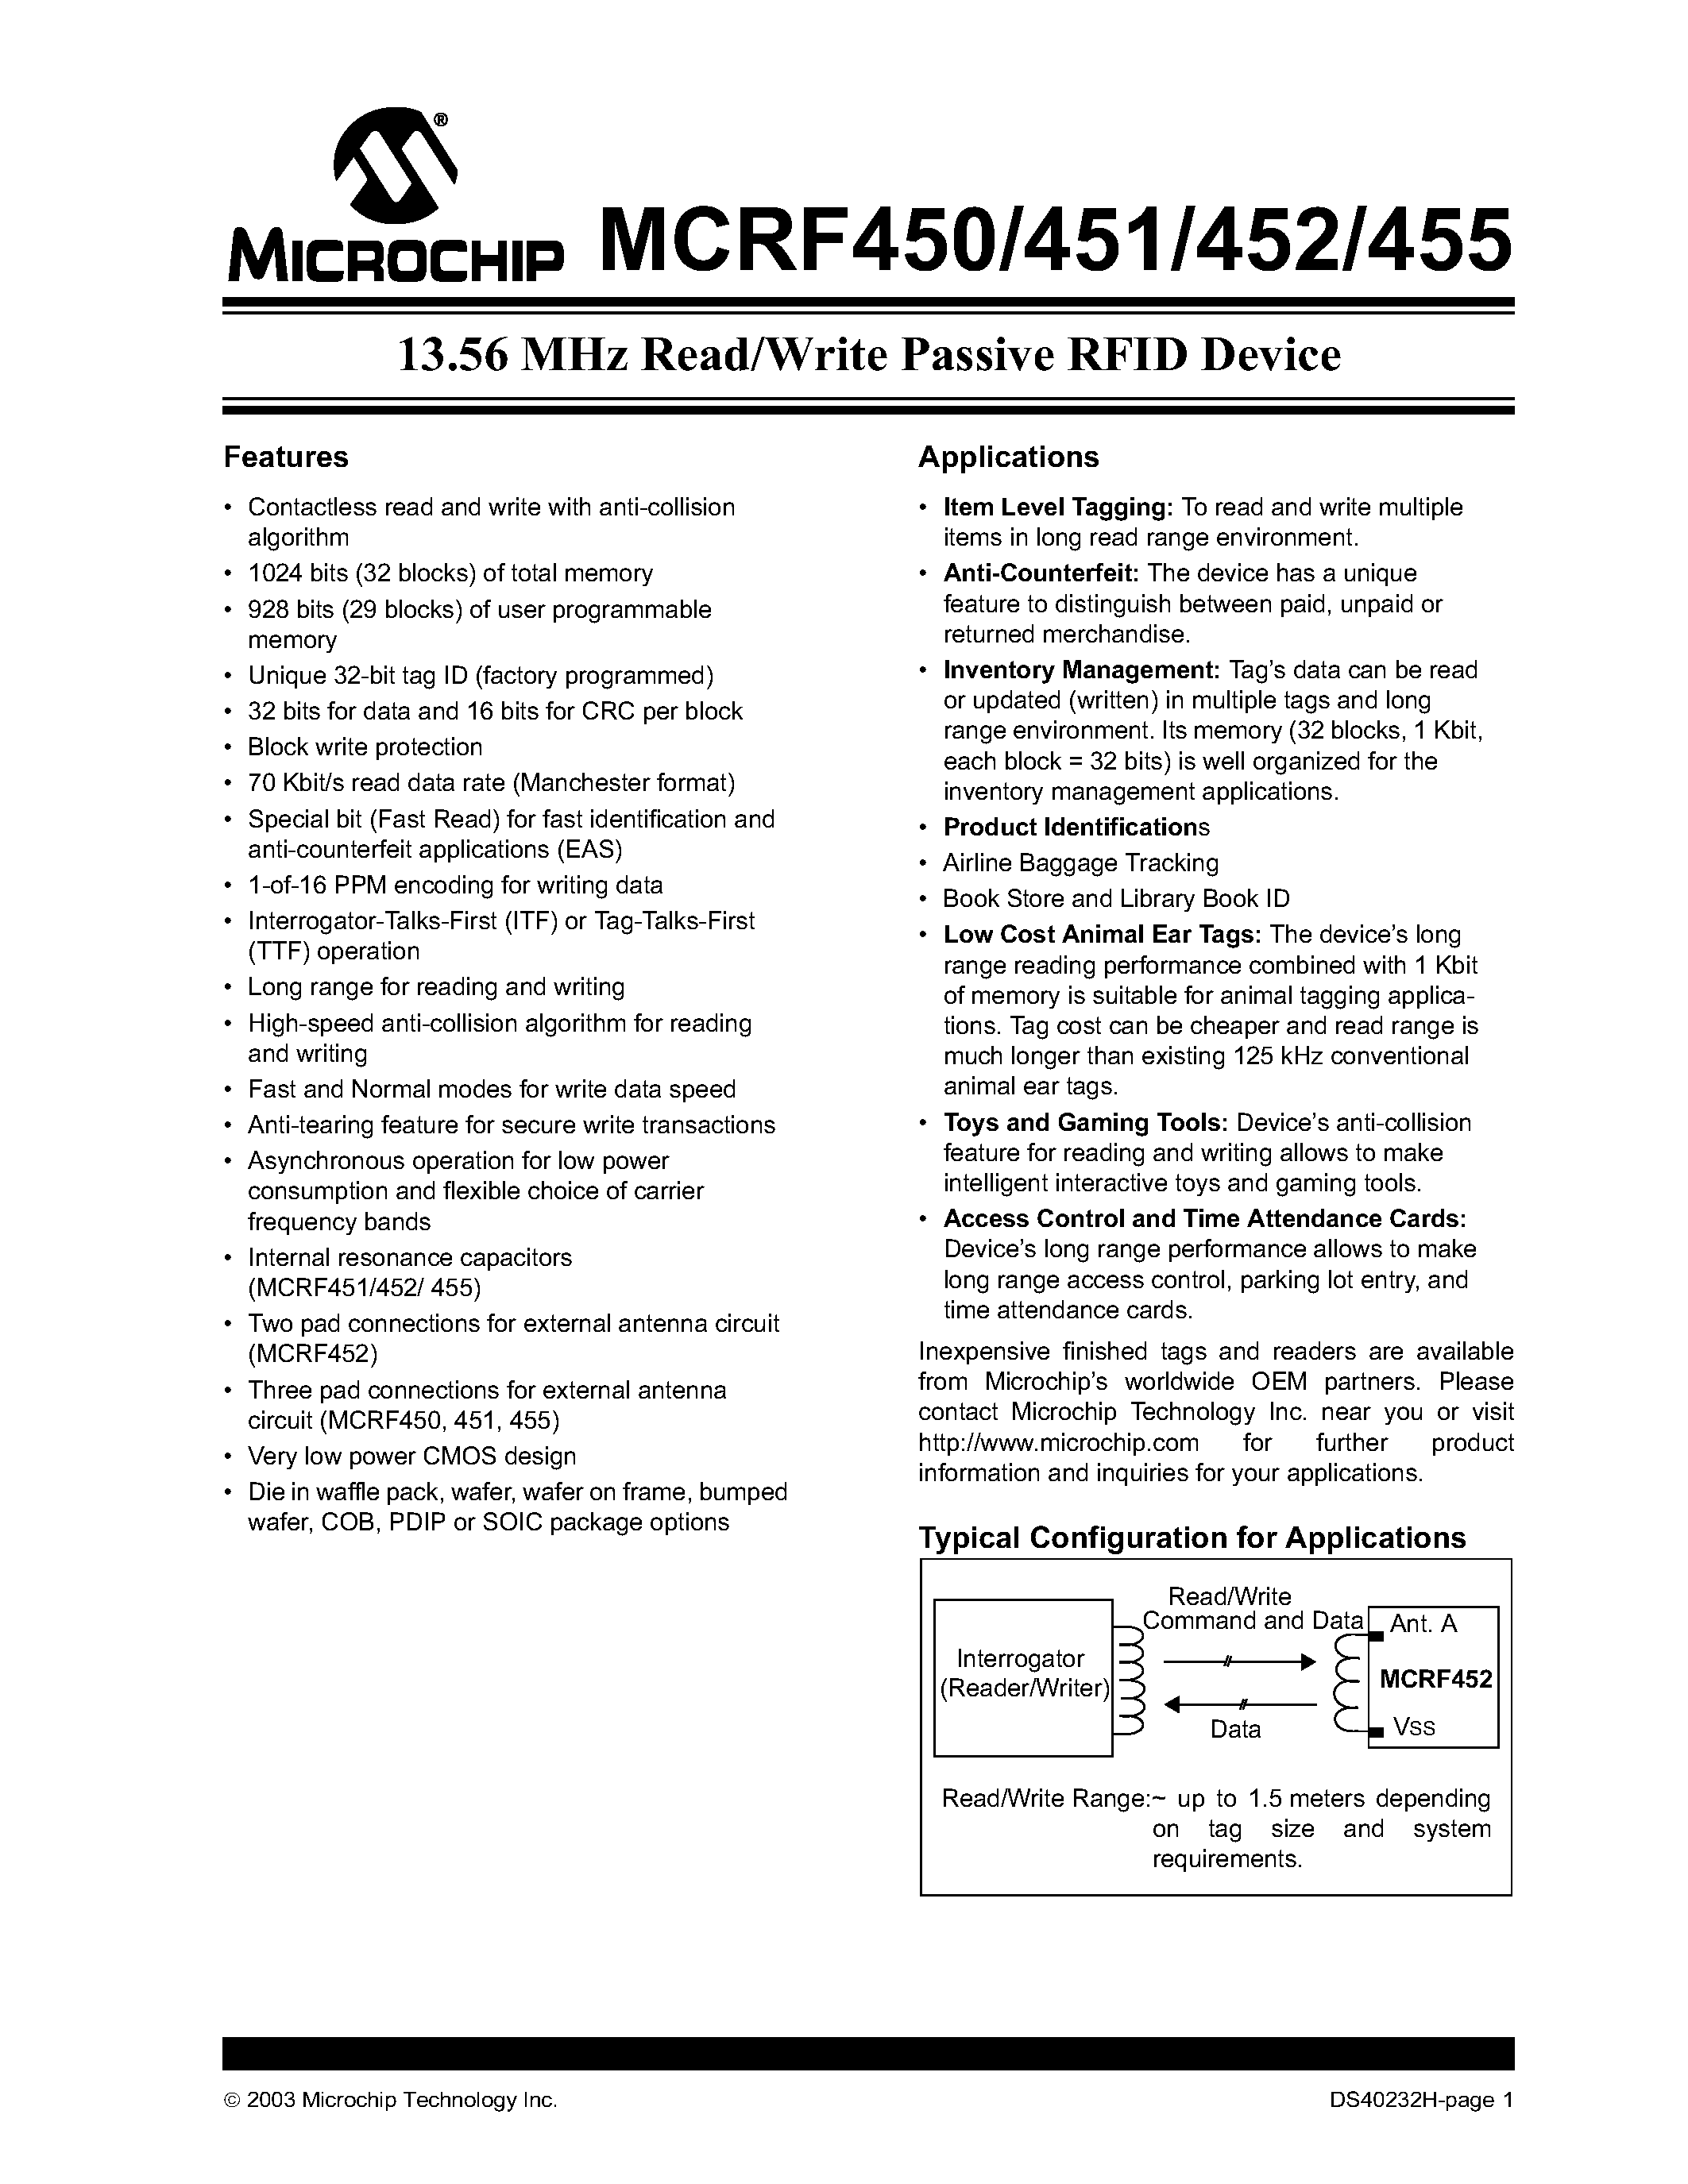 Datasheet MCRF450 - 13.56 MHz Read/Write Passive RFID Device page 1